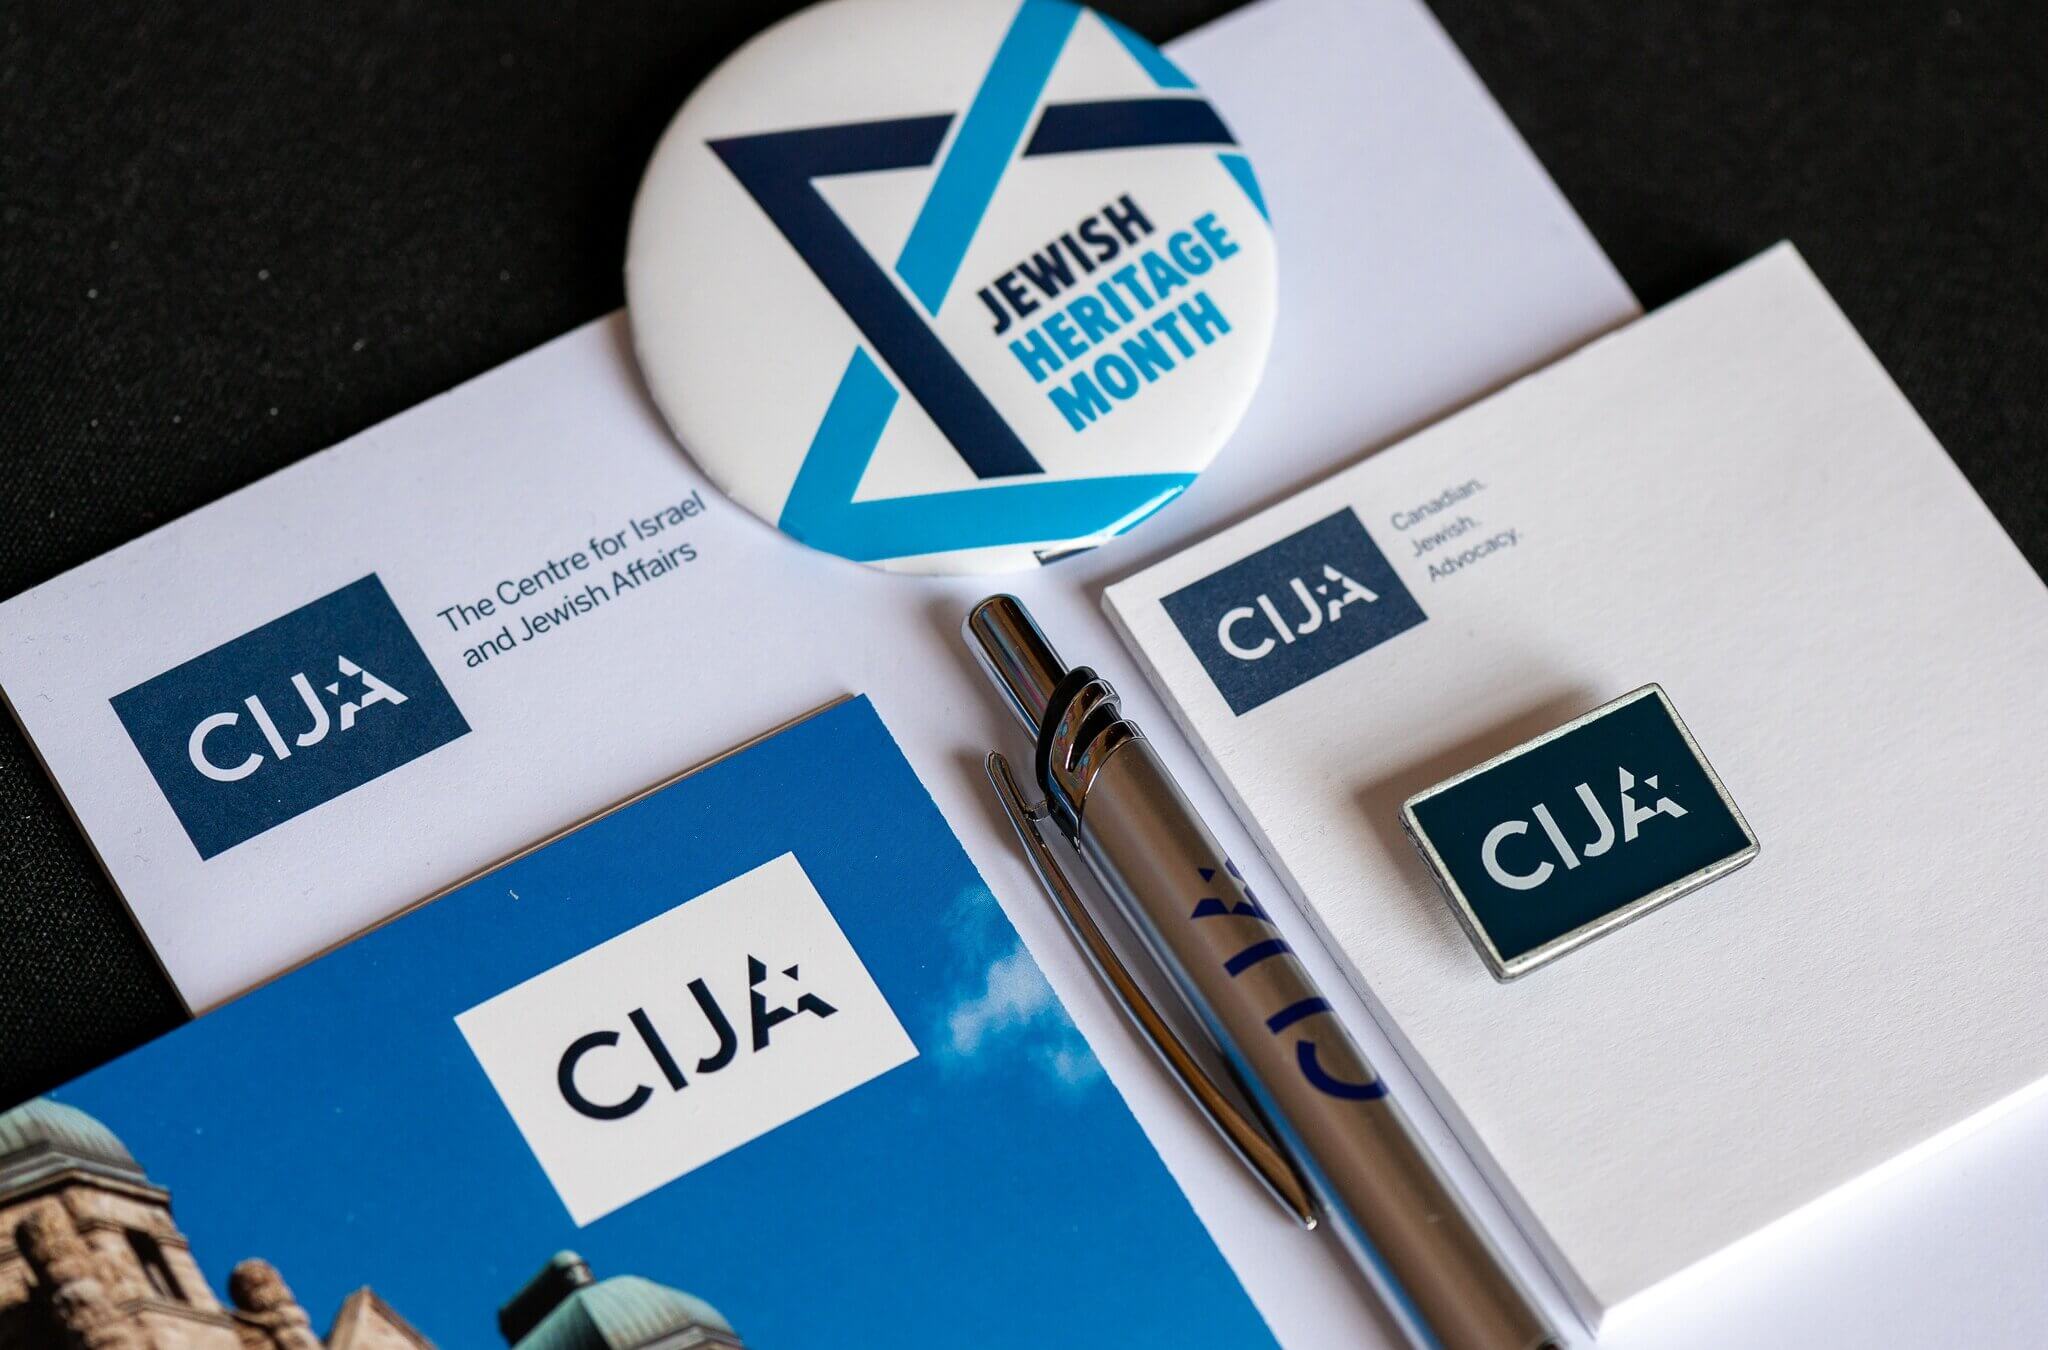 Materials from the Centre for Israel and Jewish Affairs. The organization, which is the leading Jewish advocacy group in Canada, is facing criticism over a series of newspaper articles written by David Weinberg, the director of its office in Israel.